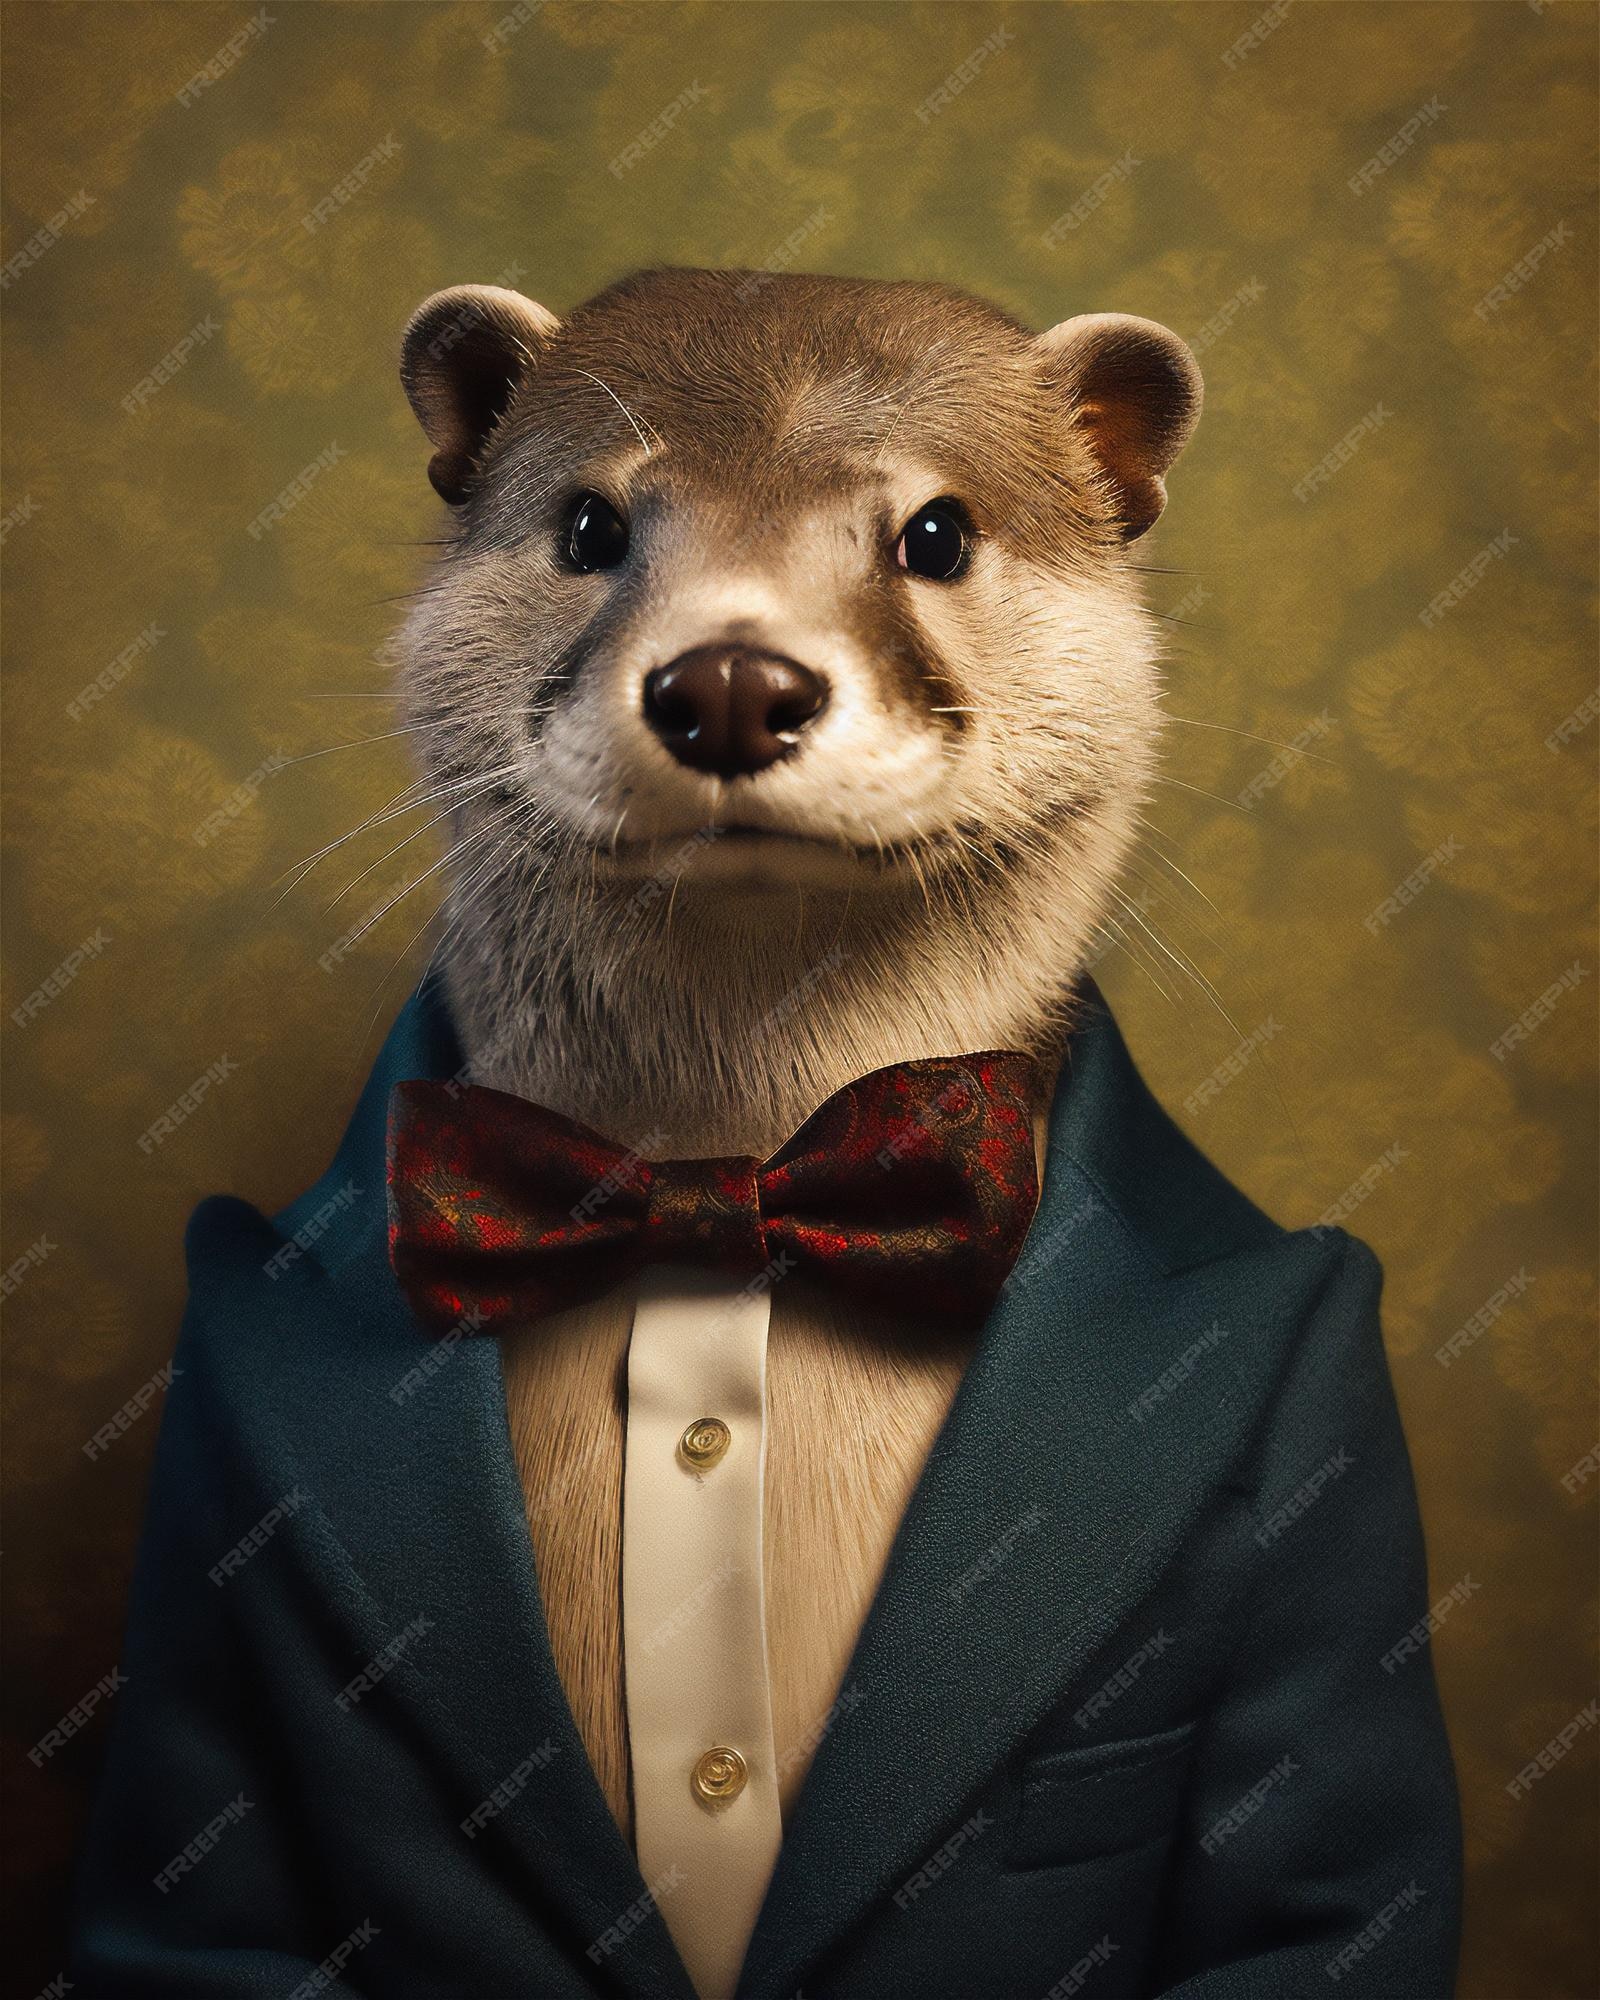 Premium AI Image | A portrait of an otter wearing a suit and bow tie